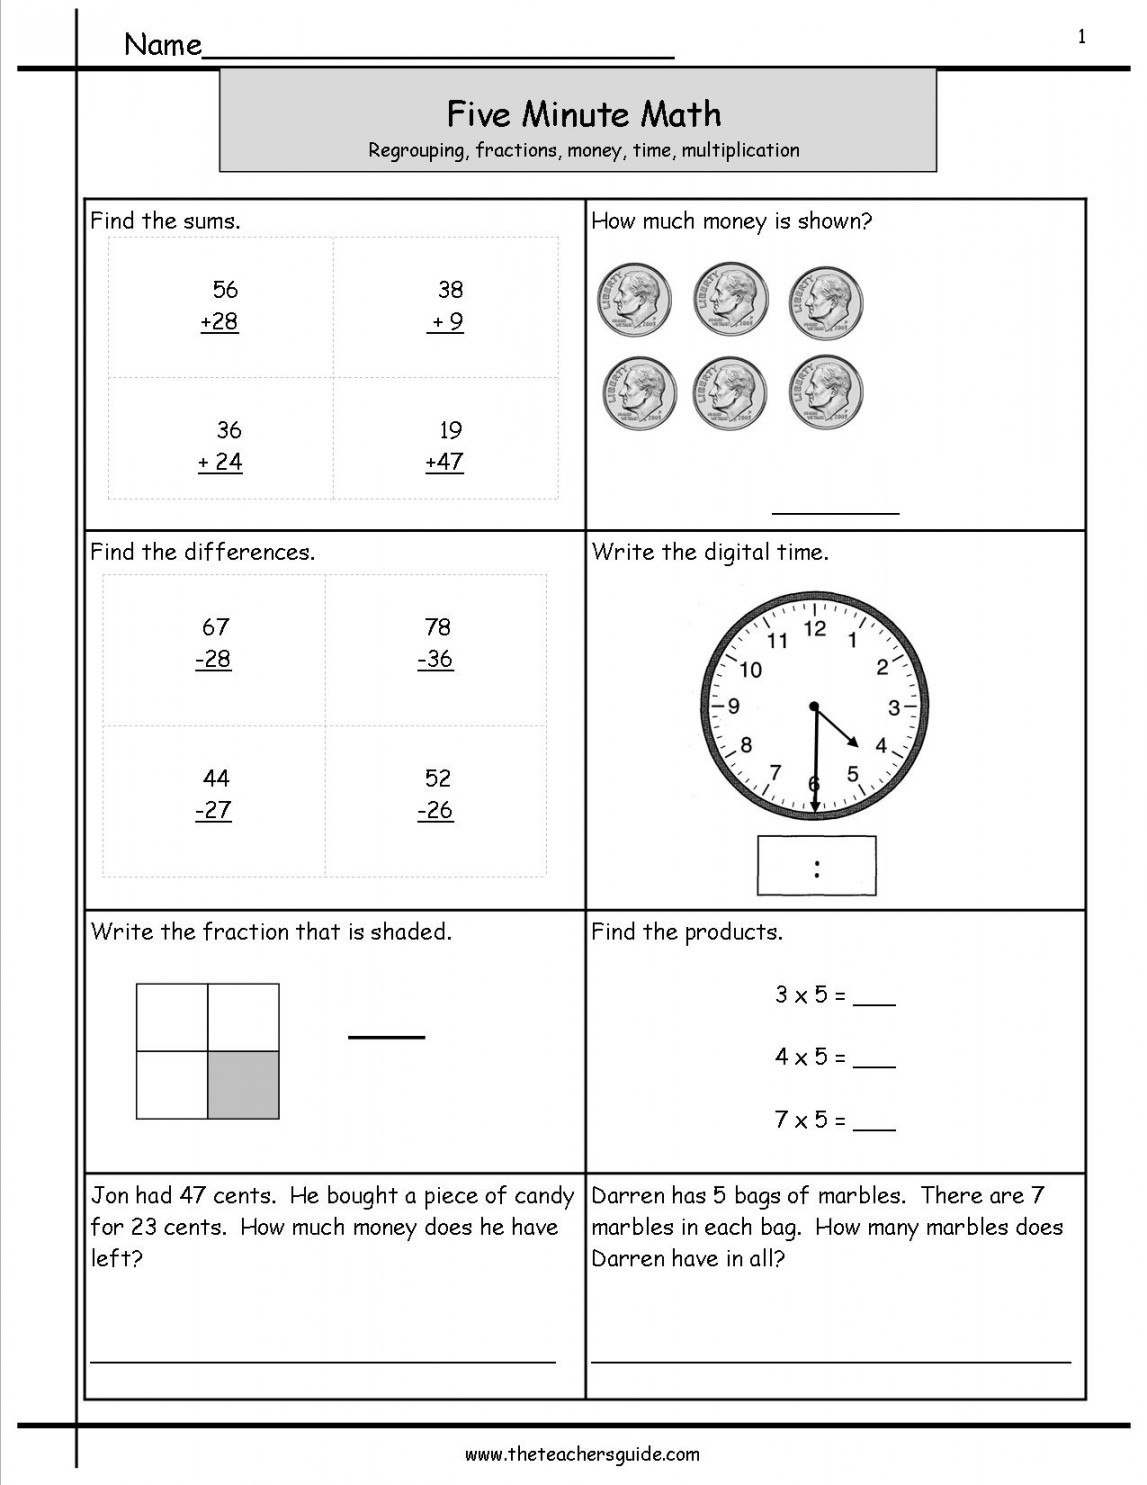 Five Minute Math Review Worksheets from The Teacher